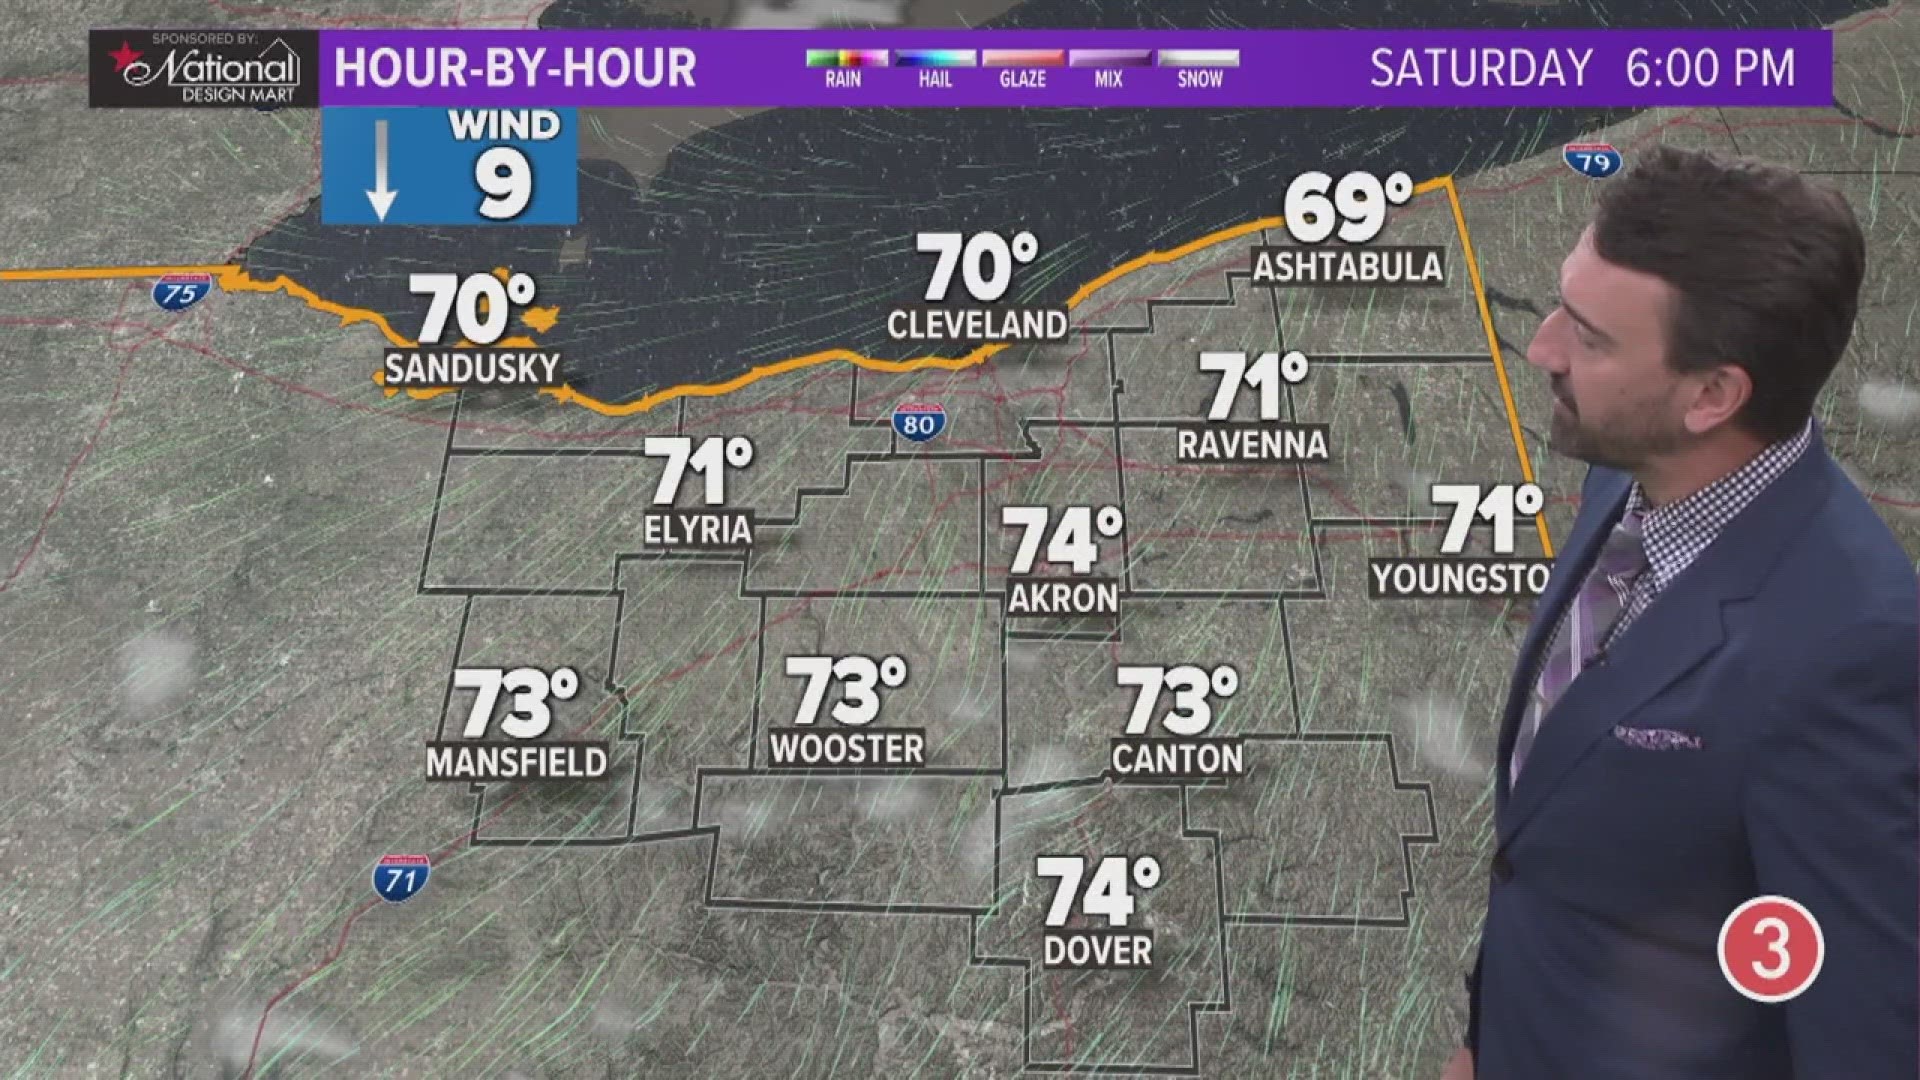 Get outside and enjoy the gorgeous weather this weekend. 3News' Matt Wintz has the hour-by-hour details in his forecast for Saturday, September 30, 2023.